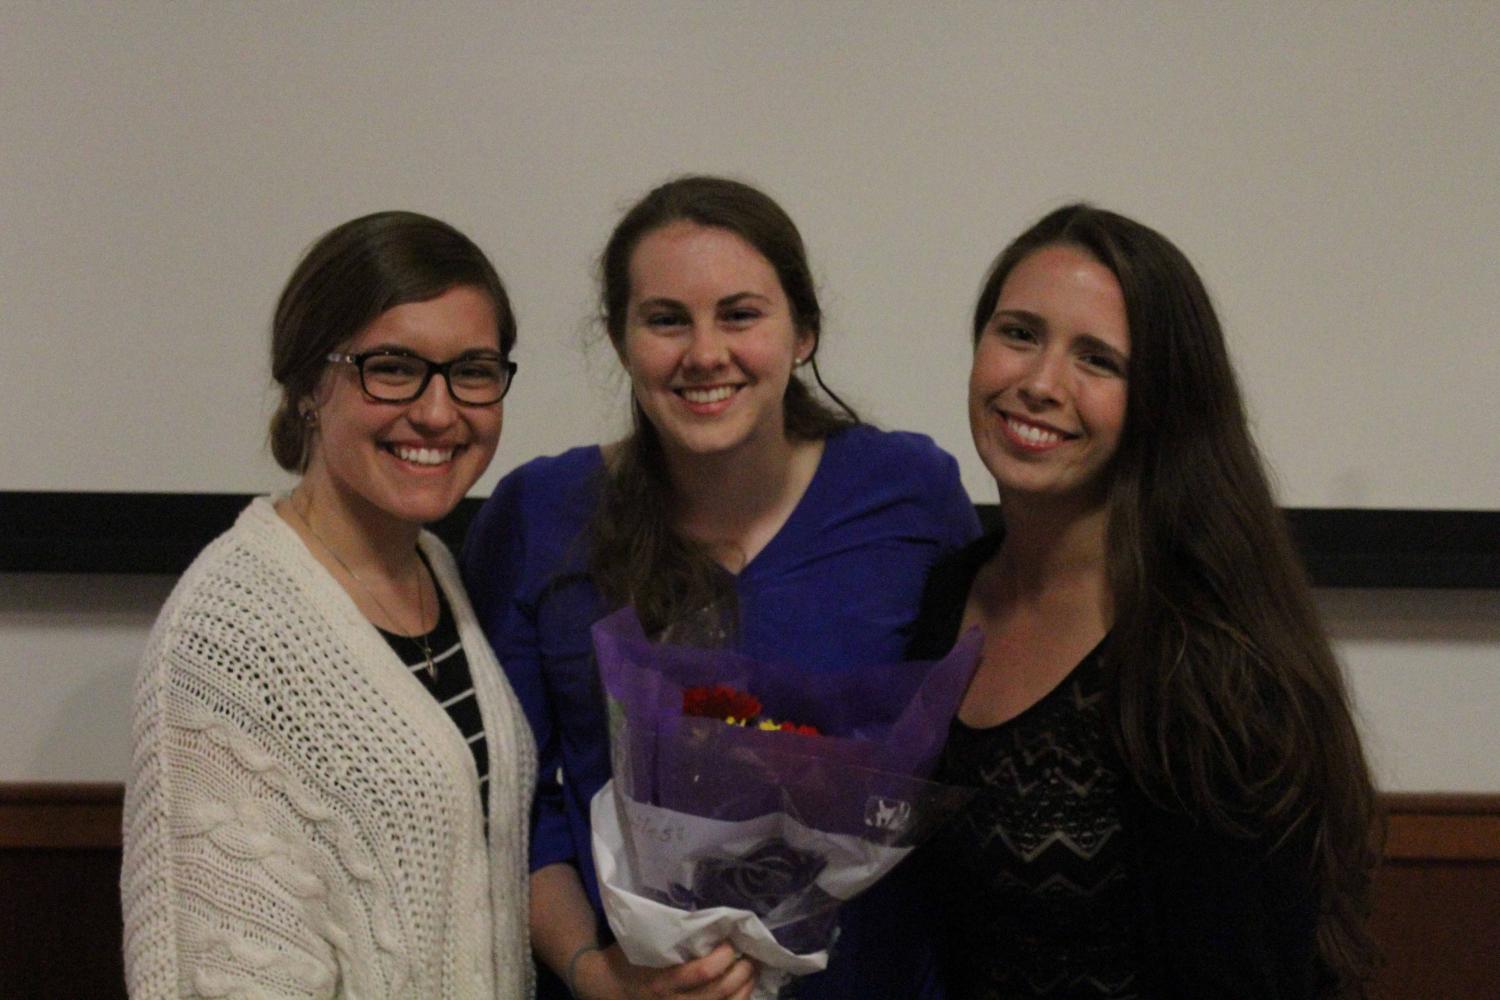 Leahy award recipient Heather Tagg ’17 (middle) with her Service and Solidarity

leaders Cassidy Diaz ’19 (left) and Jasmine Blais ’17 (right).